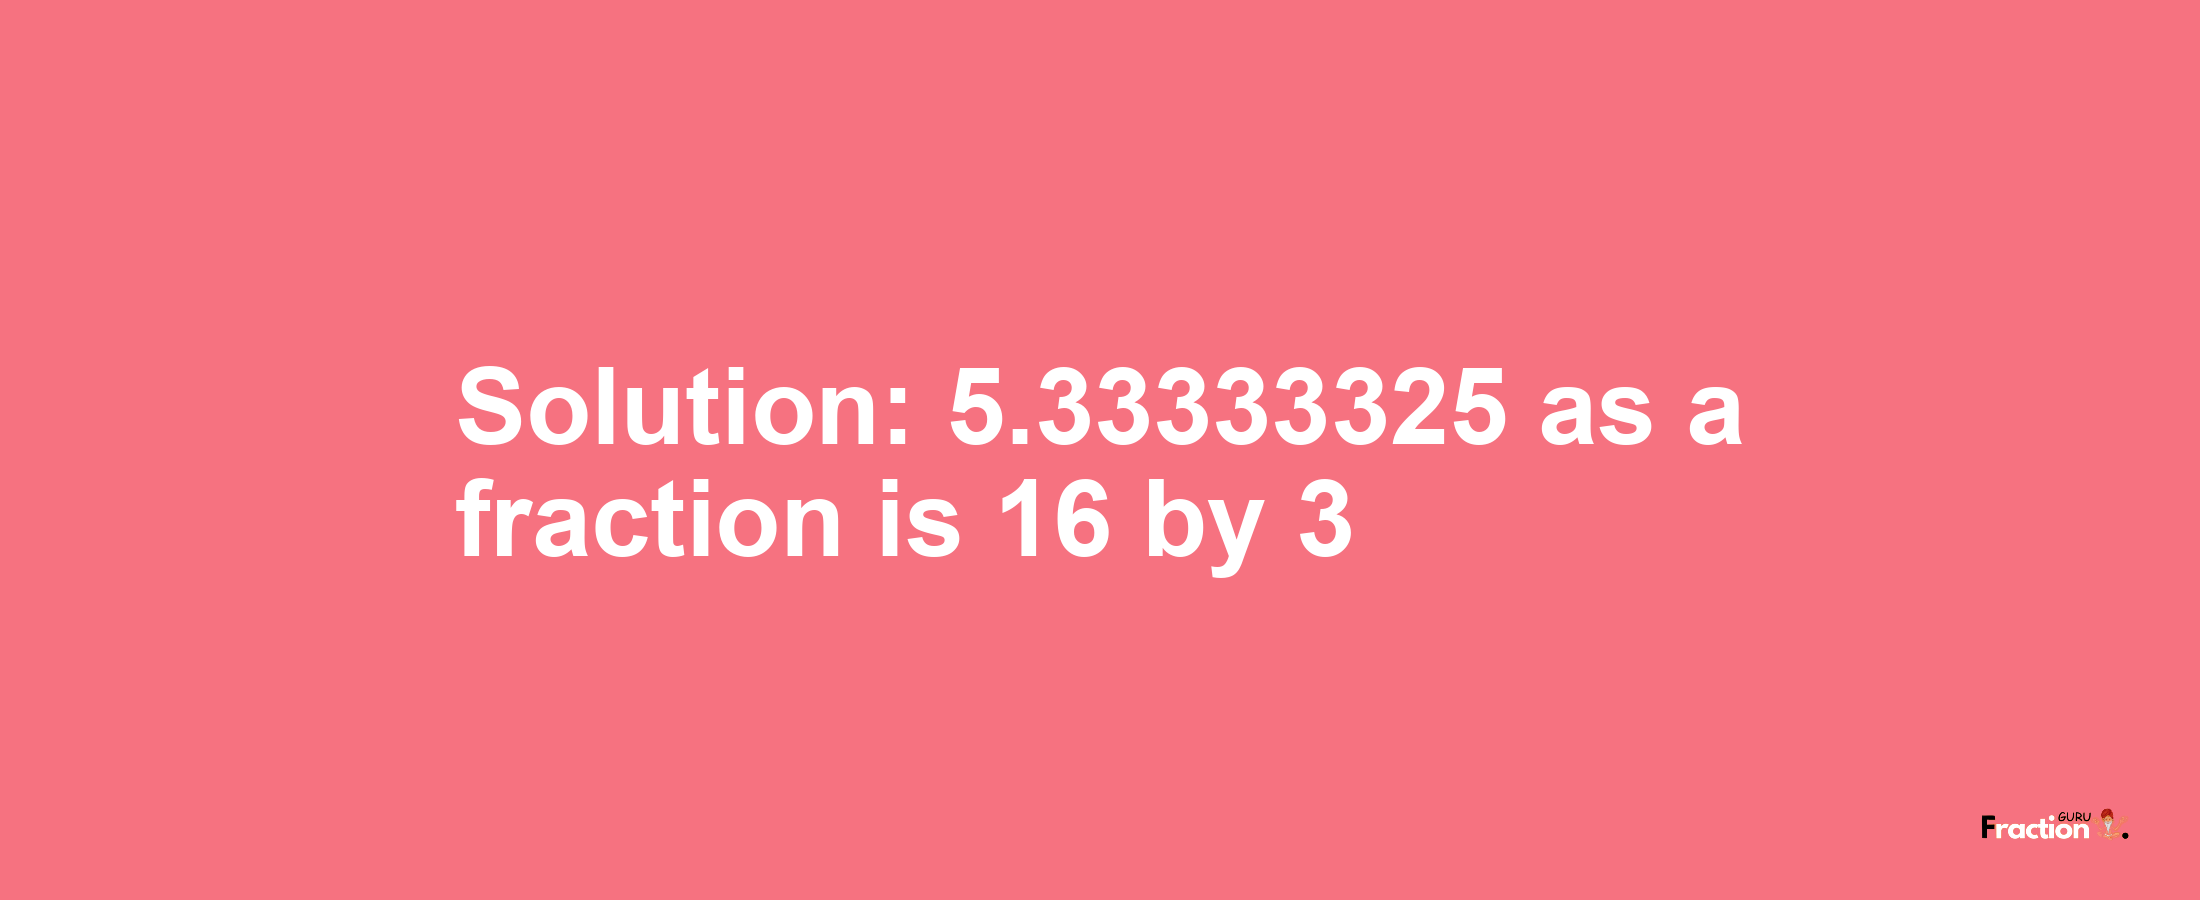 Solution:5.33333325 as a fraction is 16/3